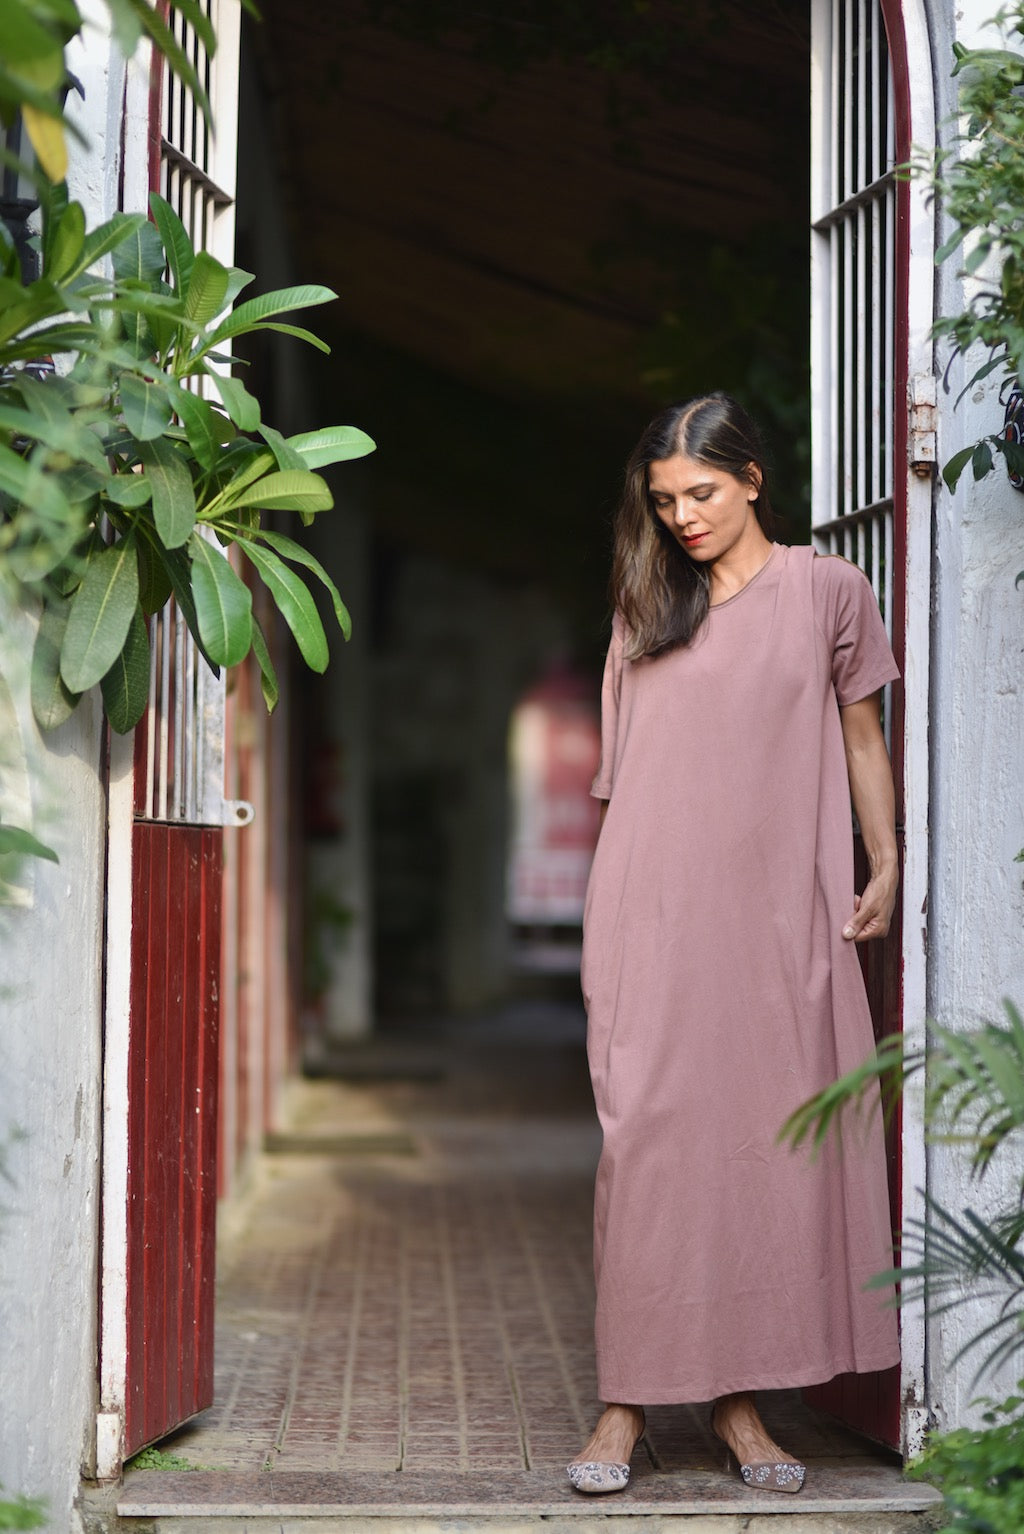 Sofia, Organic Cotton Jersey Maxi Dress in Dusty Rose, Embroidered at Shoulder - kinchecom